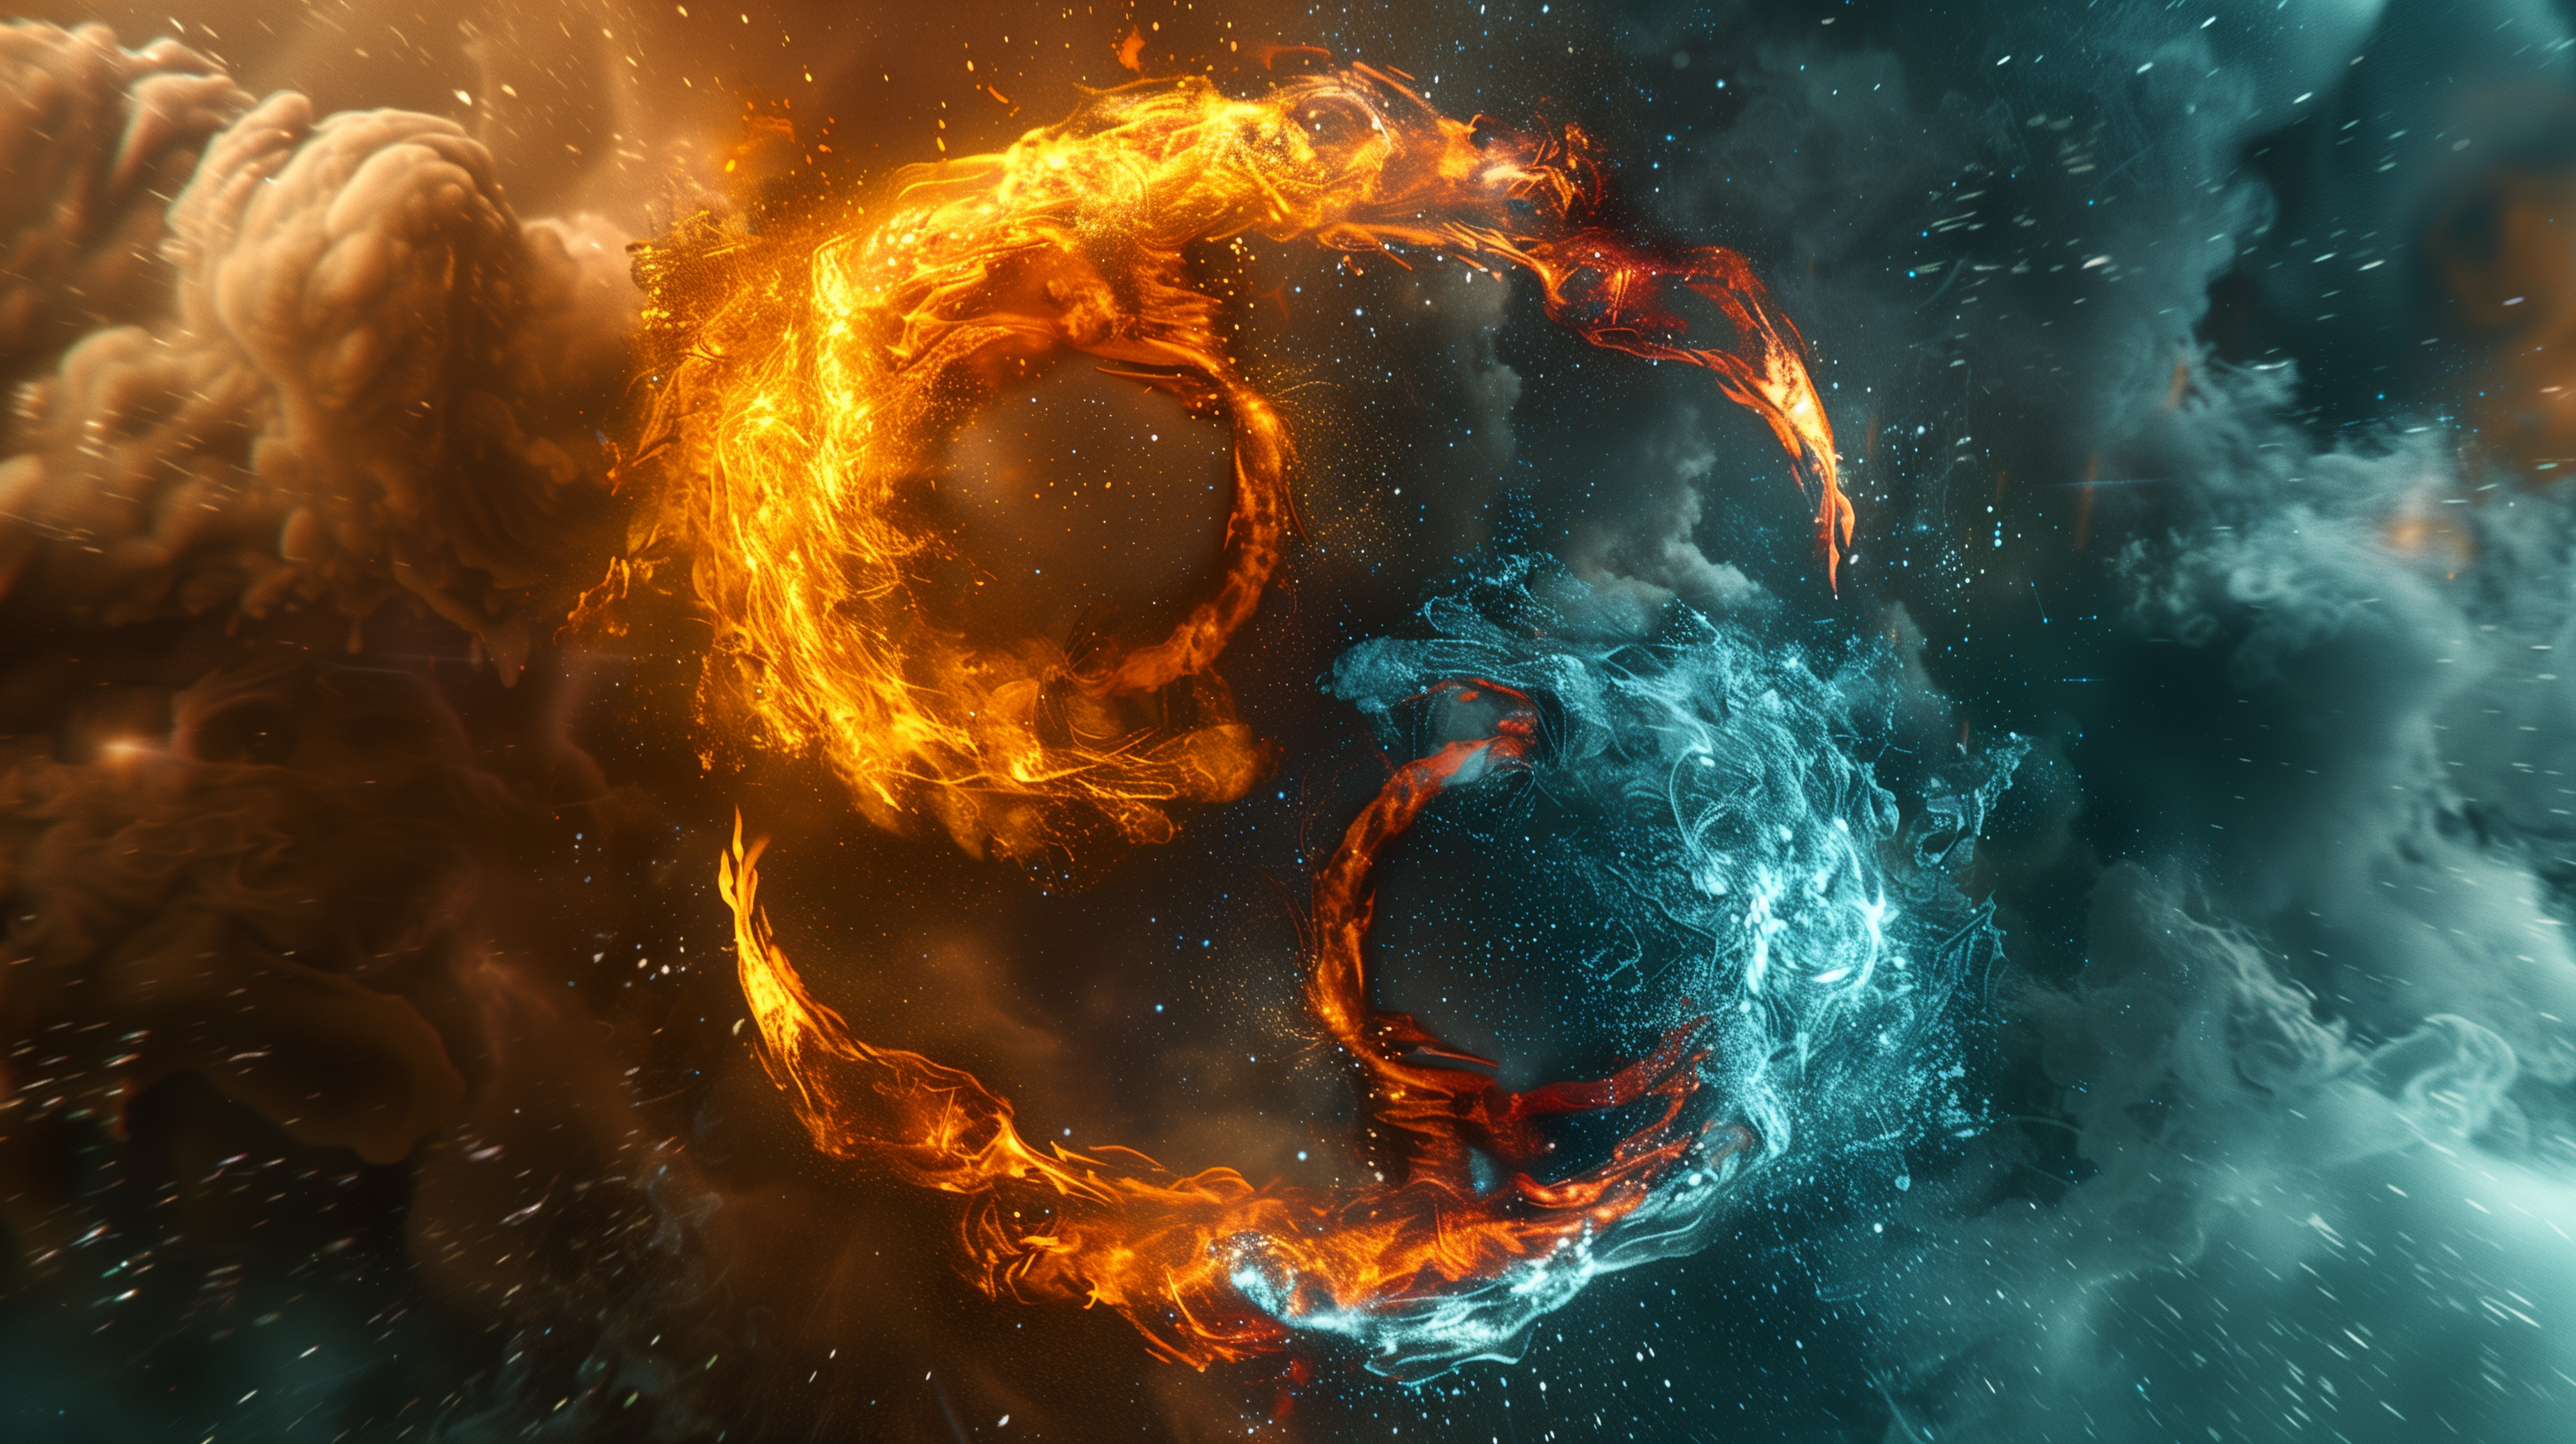 An AI-generated yin and yang symbol of fire and ice in the clouds